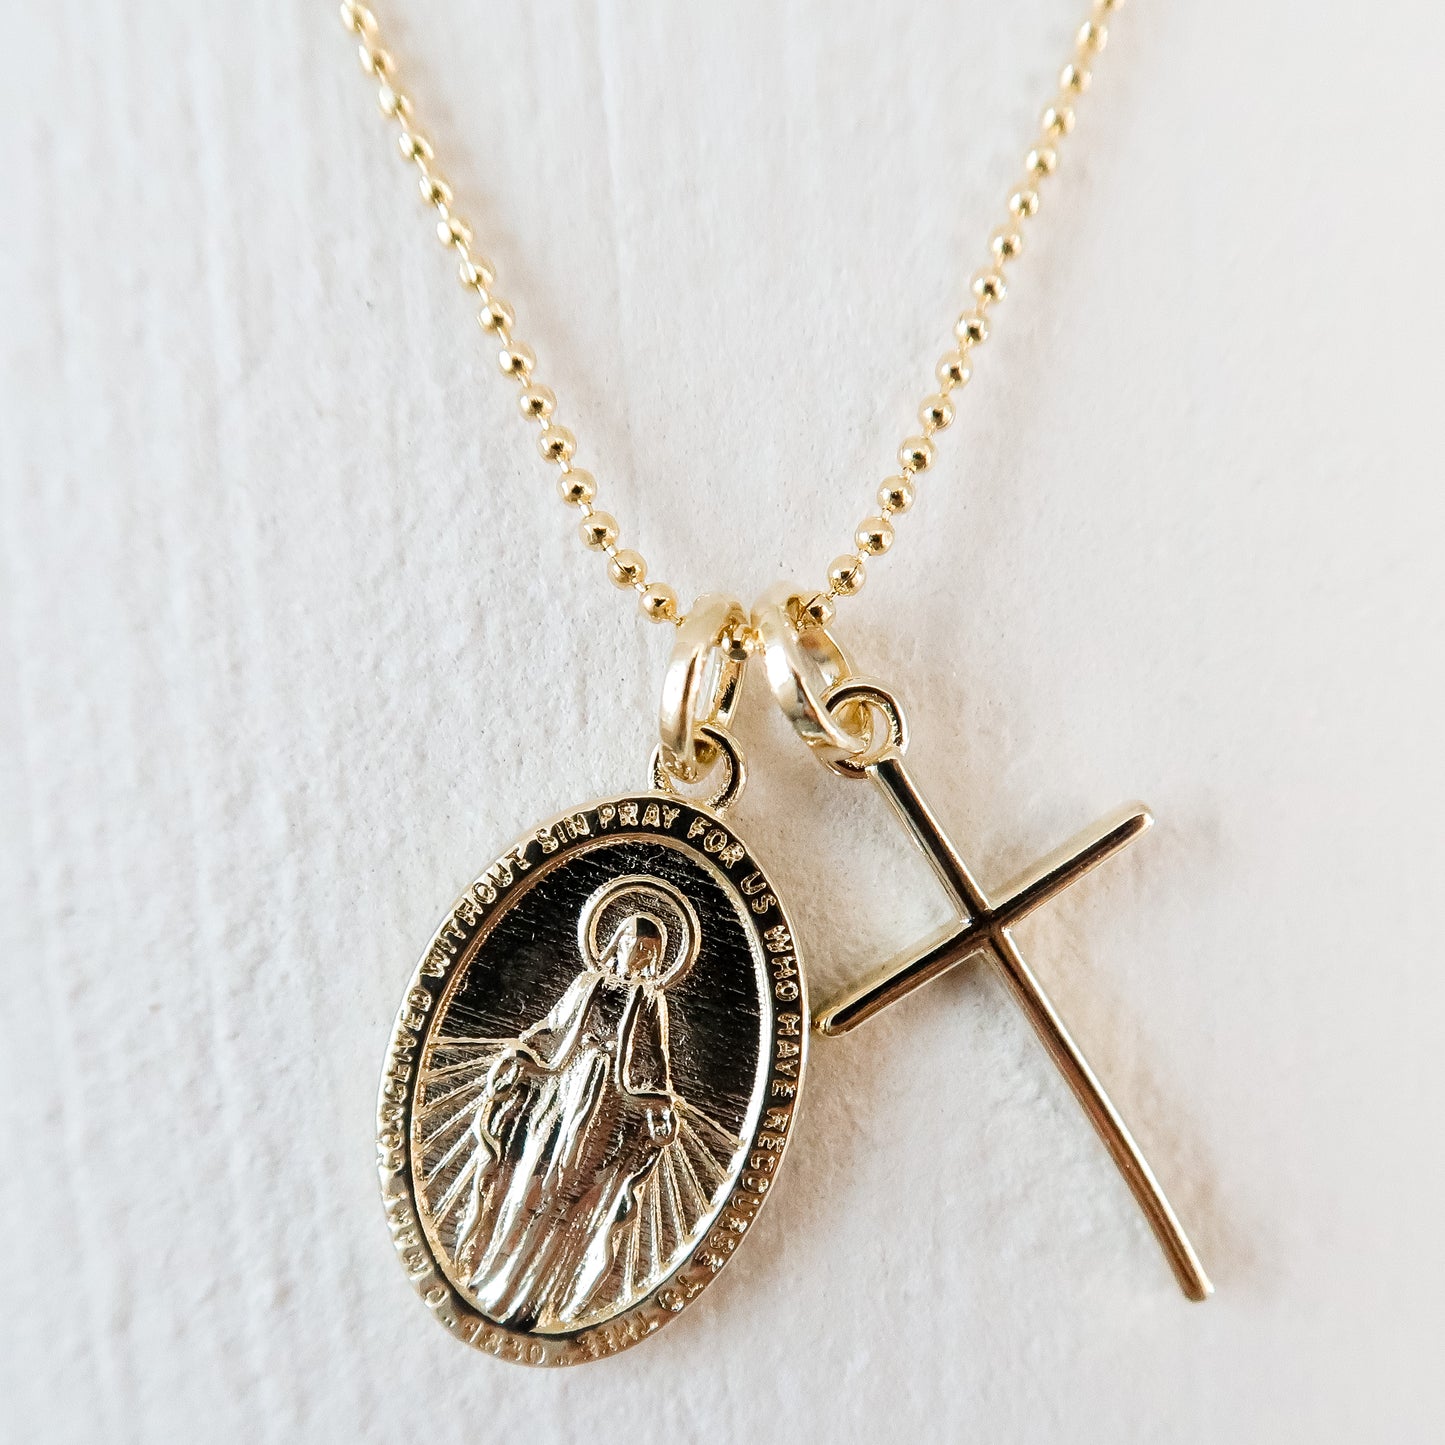 Gold_Aesthetic_Jewelry_Catholic_Miraculous_Medal_Our_Lady_Blessed_Mother_Mary_Faith_Bracelet_Necklace_Traditional_Shop_Pendant_Modern_Chain_Necklace_Women_Trendy_Mom_Devout_Faithful_0